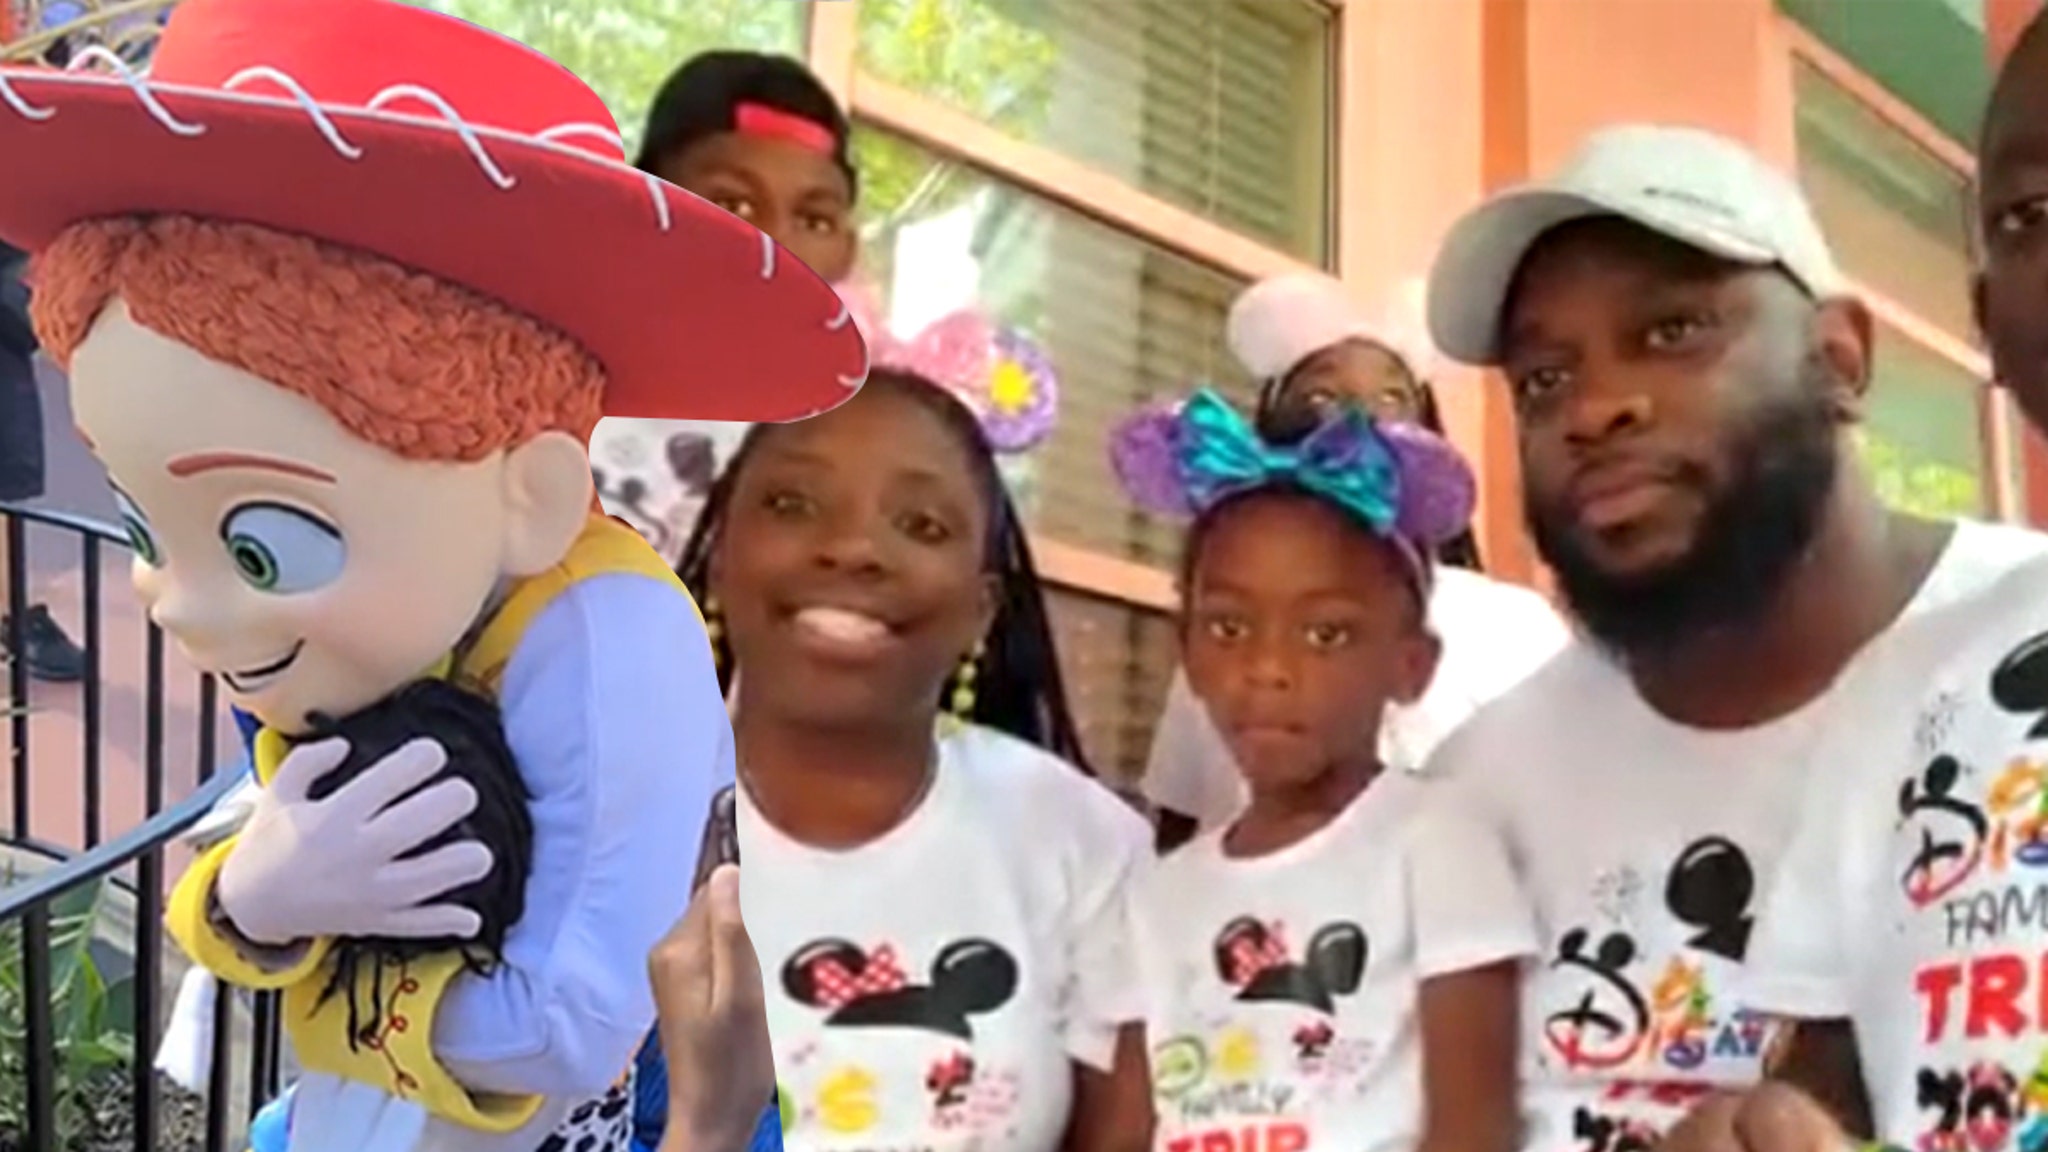 Family From Viral 'Toy Story' Hug Says Characters Should Embrace Kids of All Races